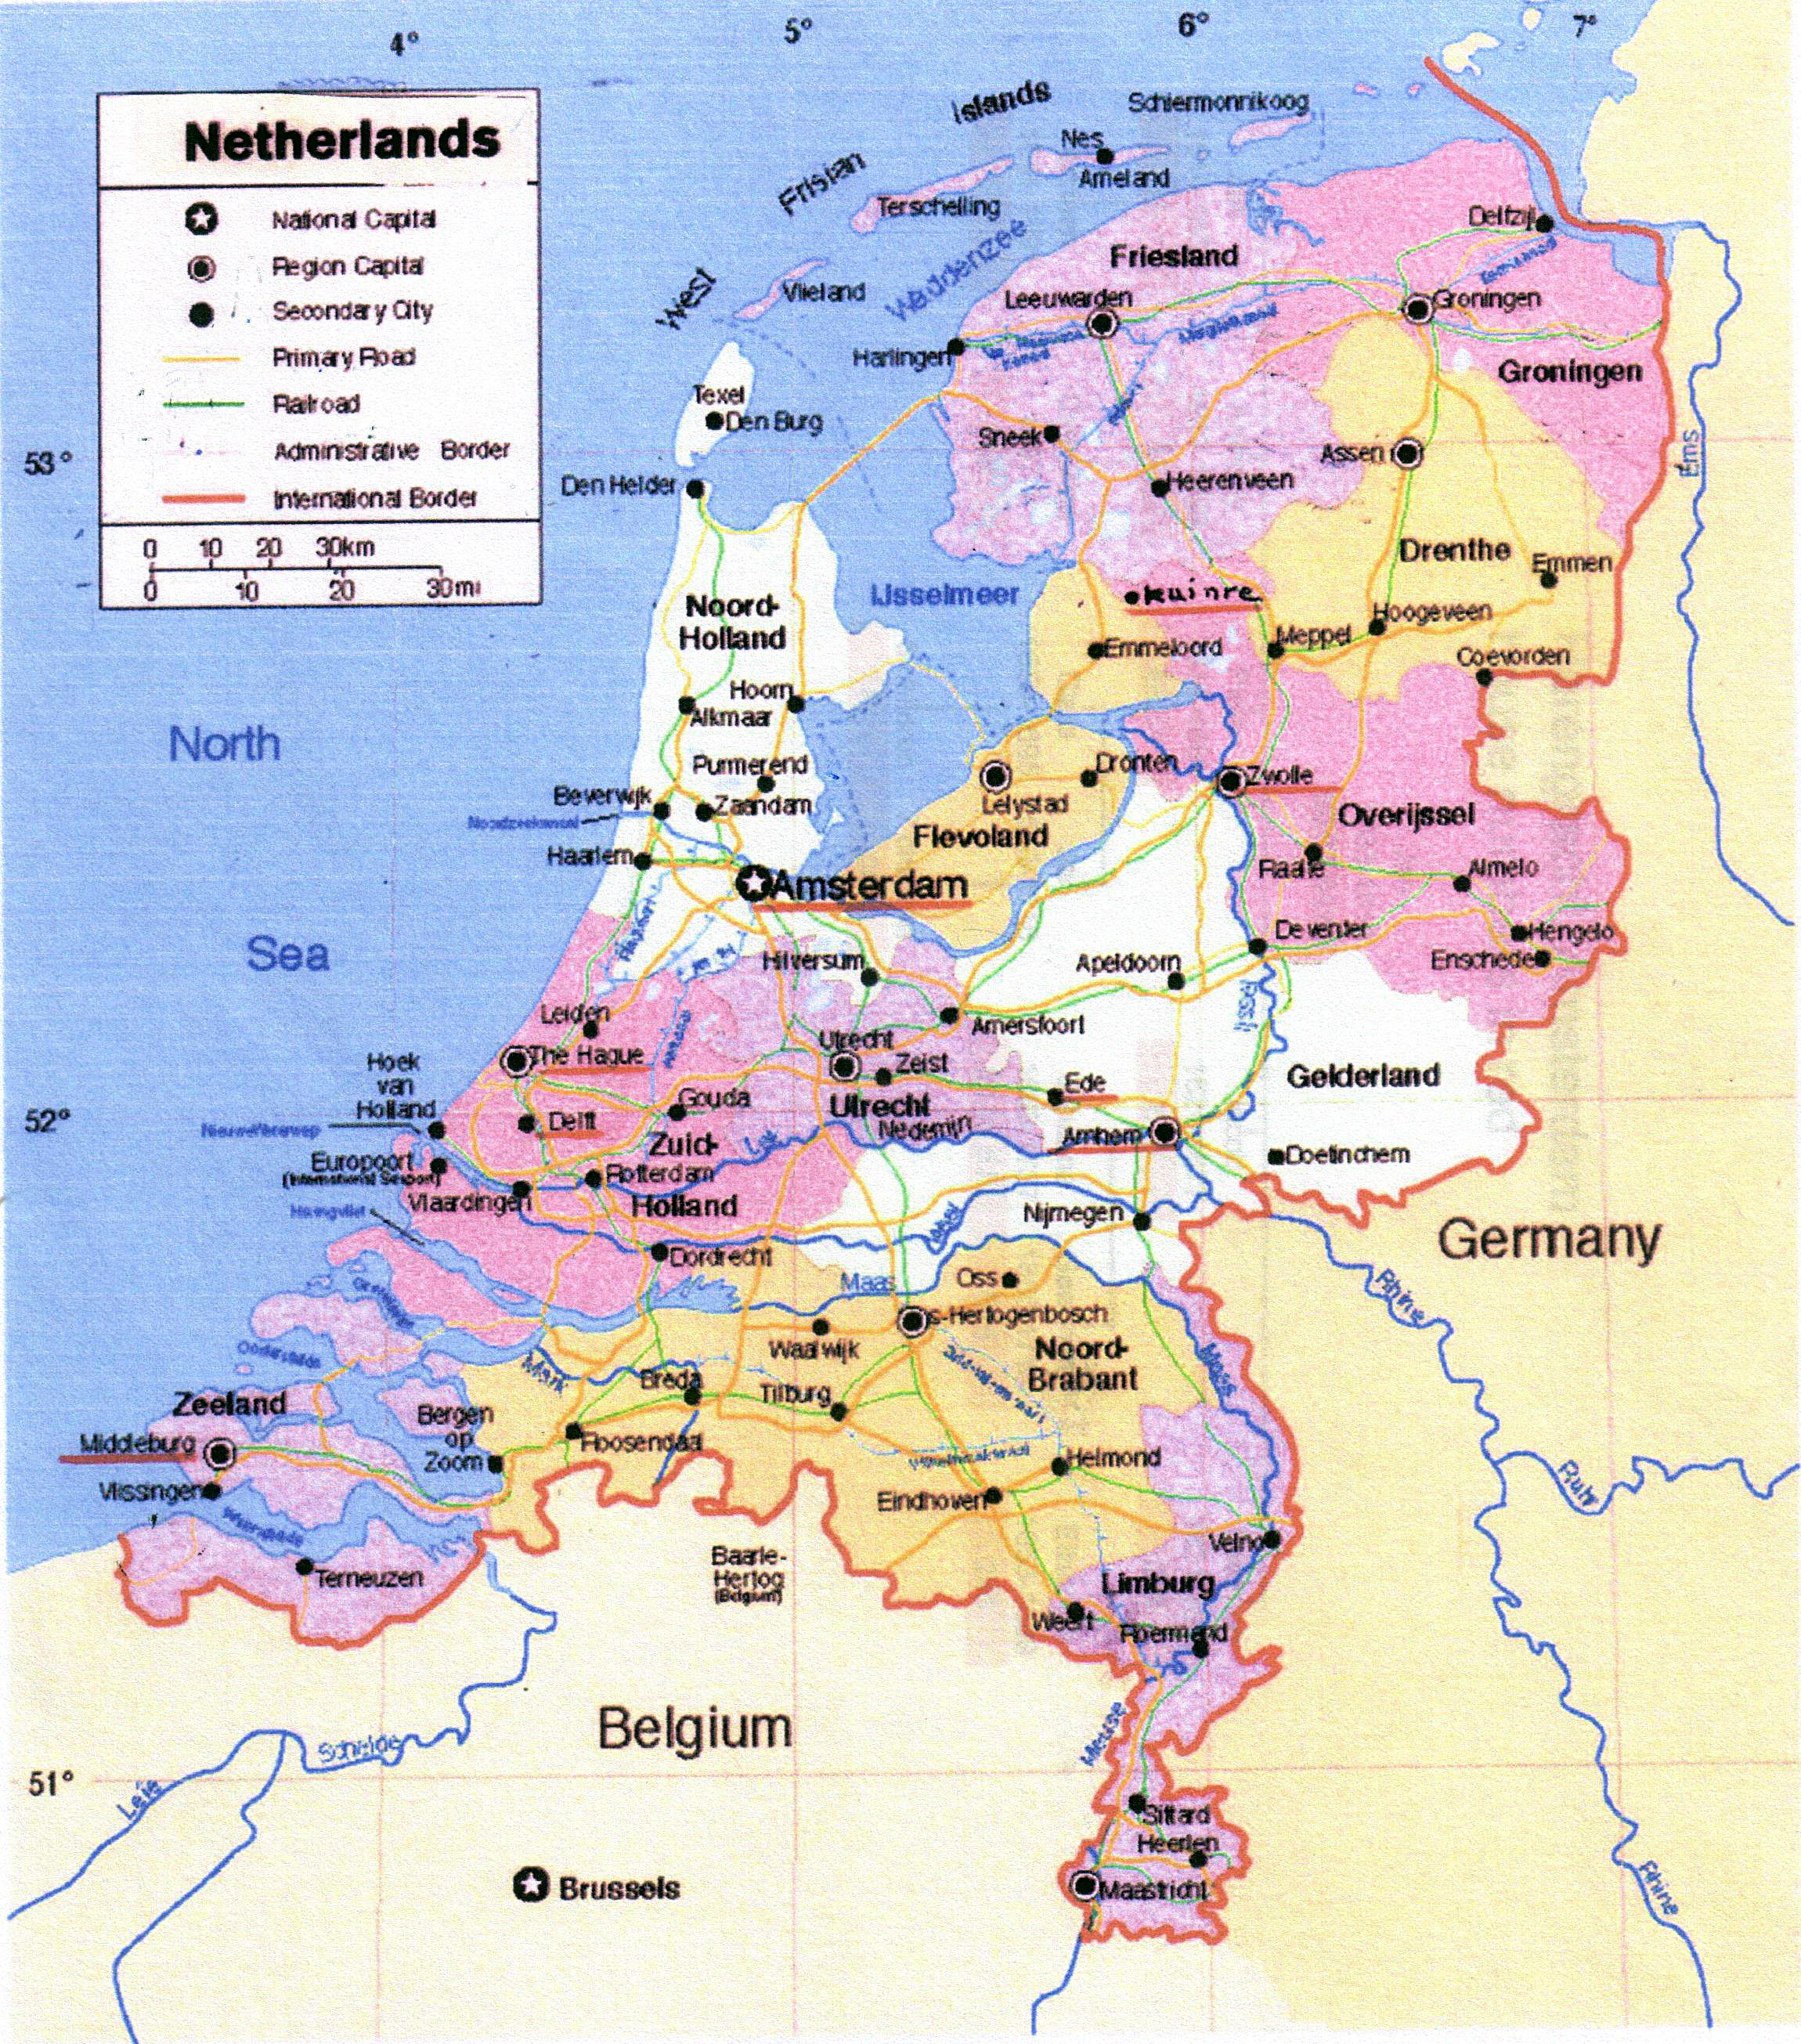 Large Political And Administrative Map Of Netherlands With Roads And